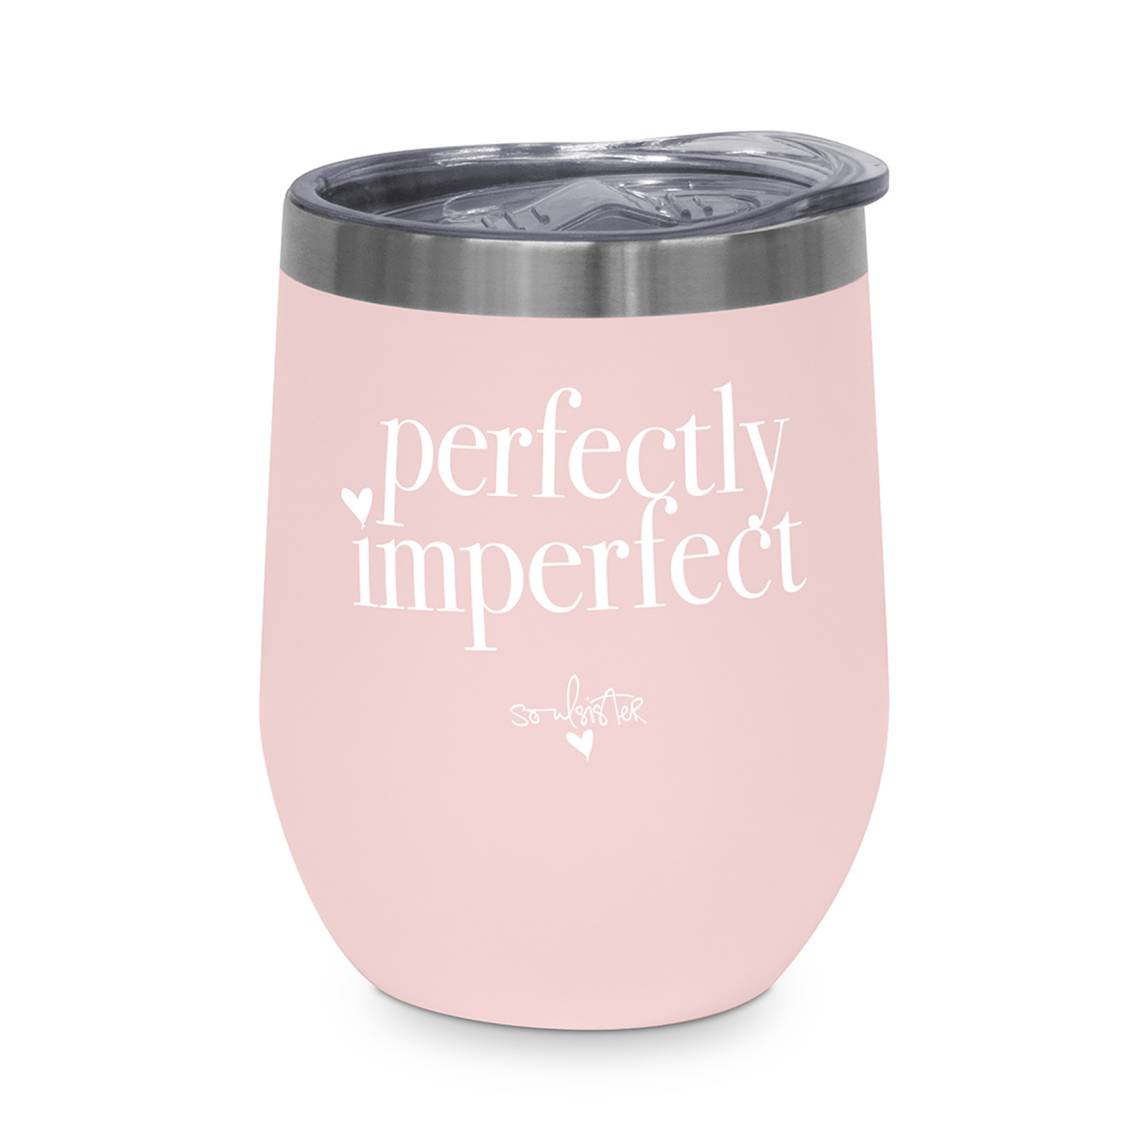 Design-at-home - Thermo-Mug 350 ml - Perfectly imperfect